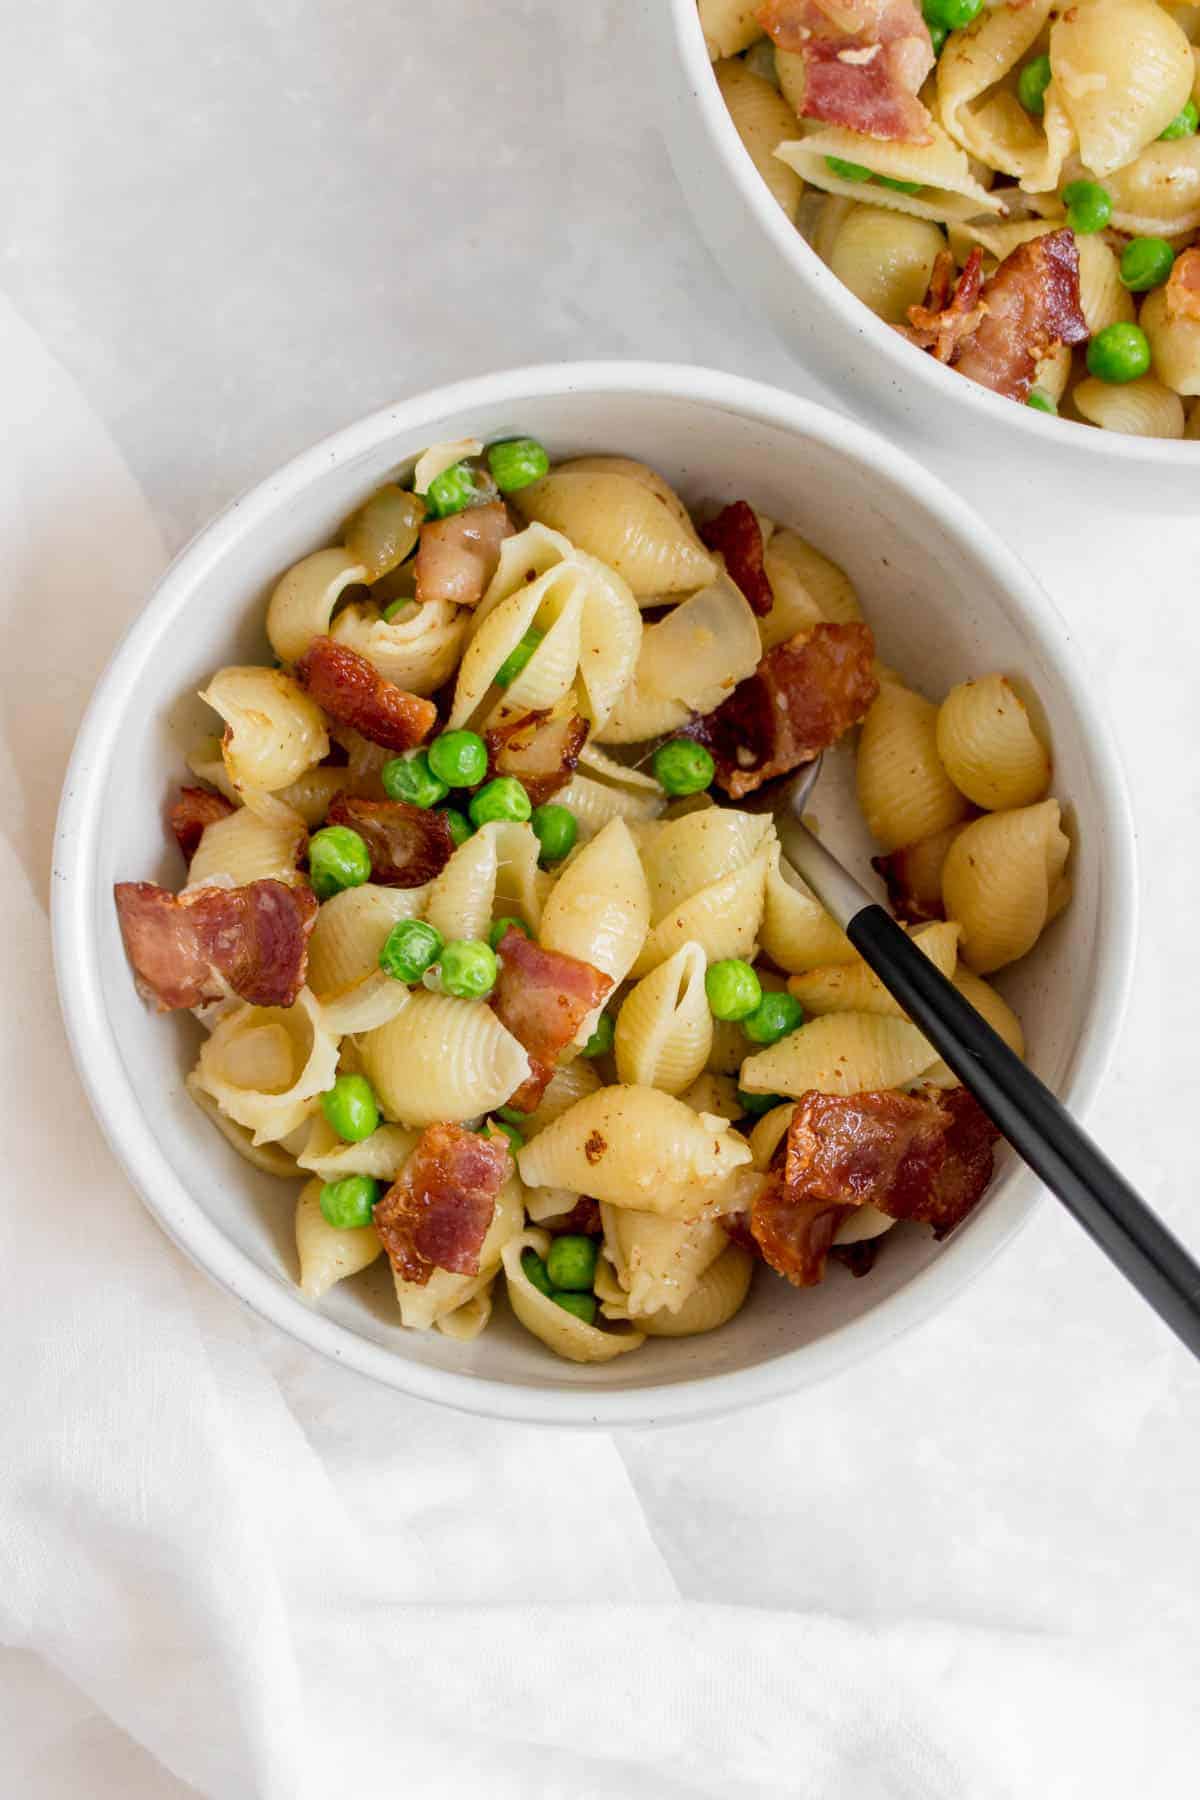 Overhead view of a bowl of pasta with peas and bacon and a fork.